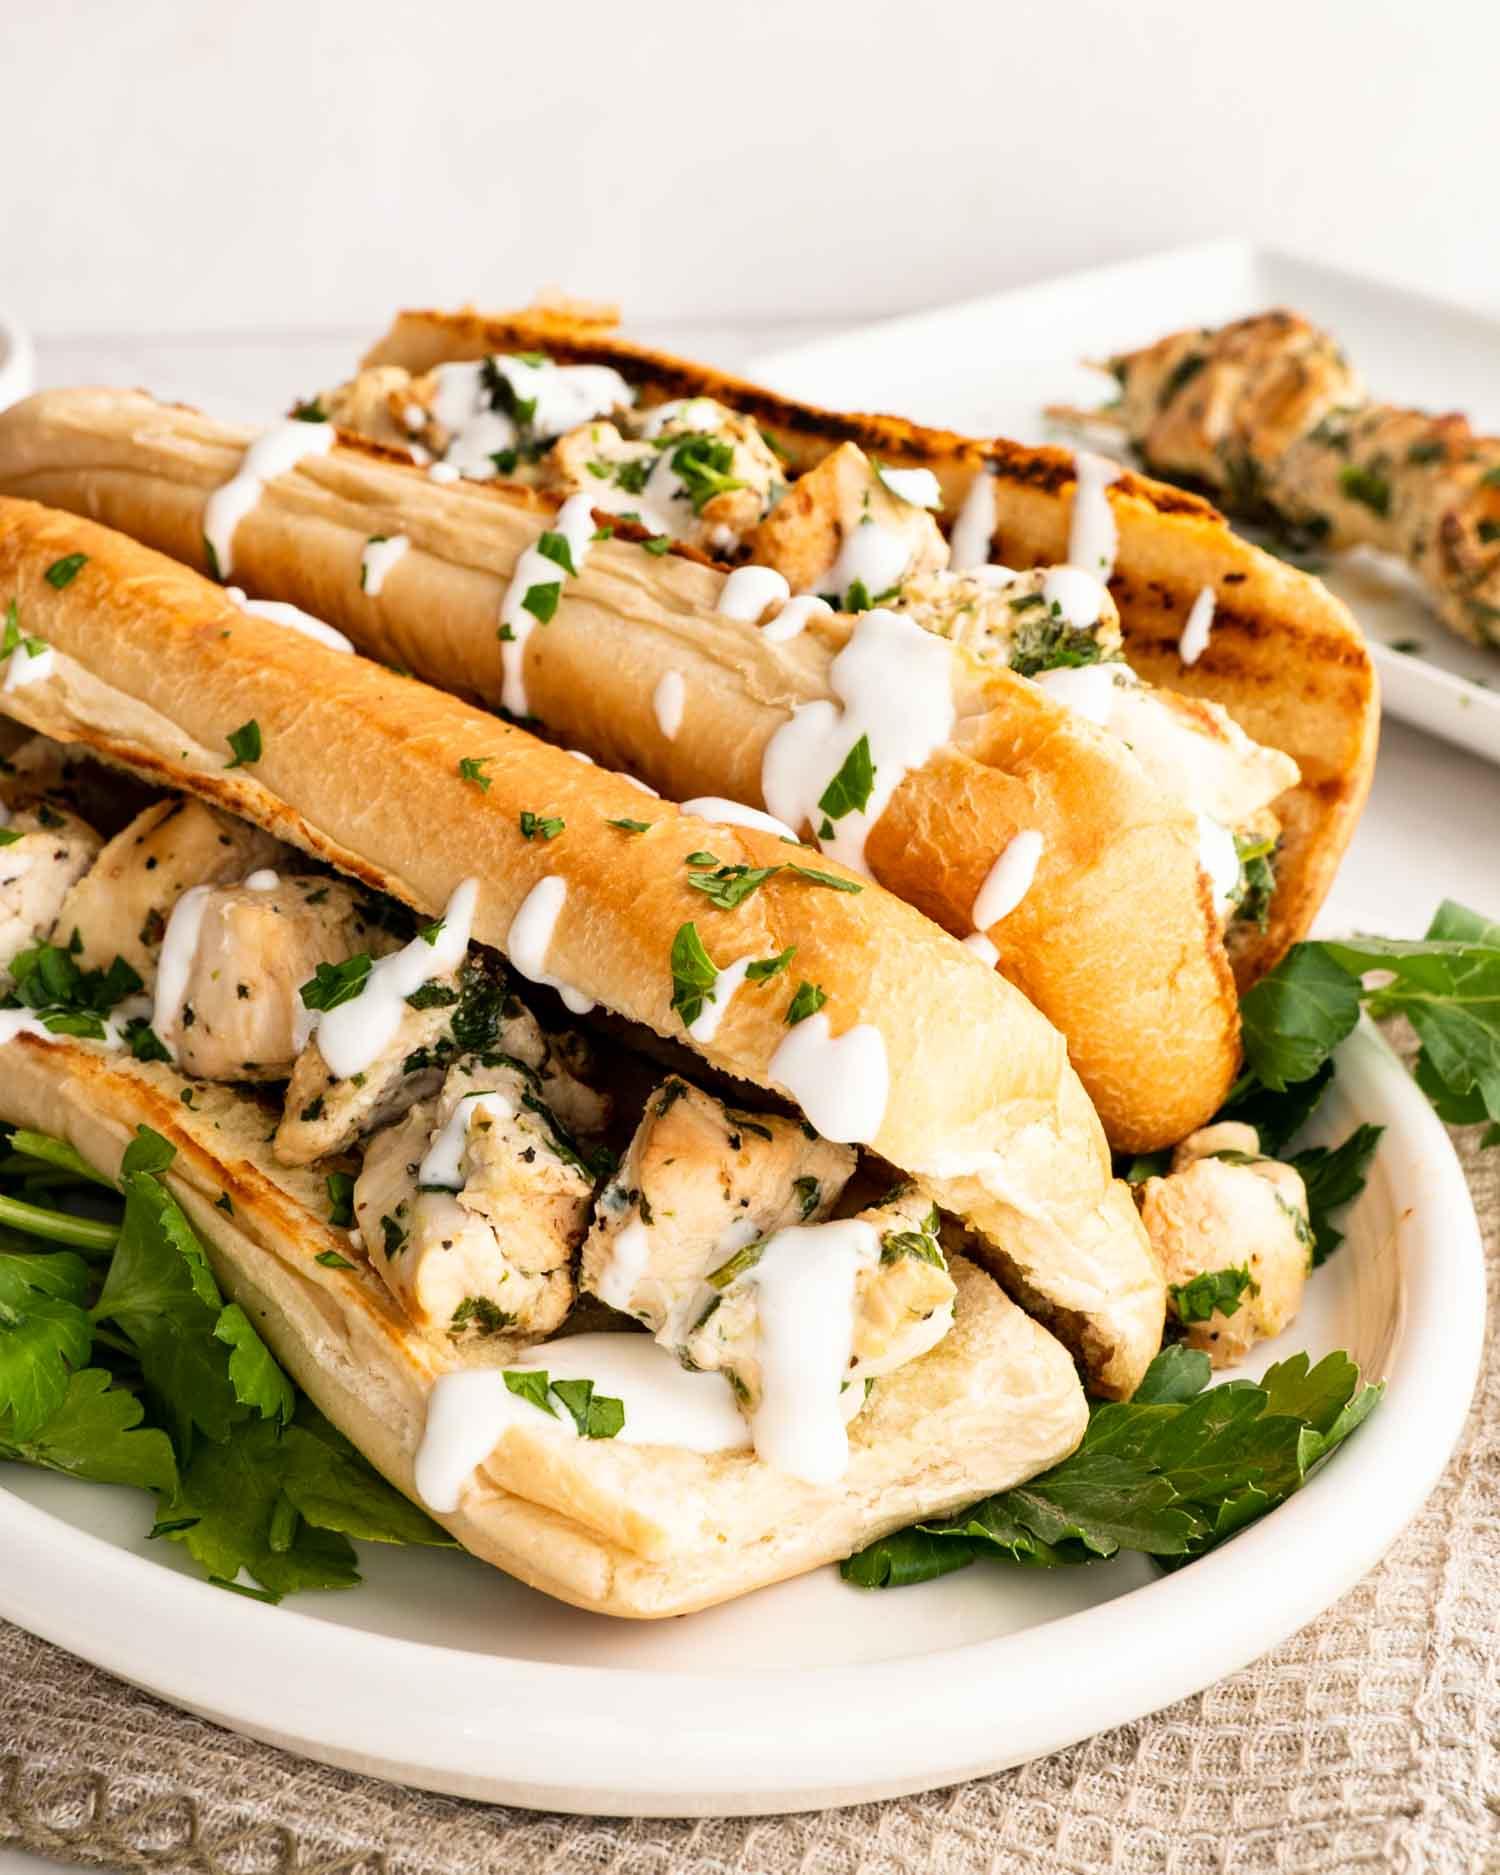 two chicken spiedies on a plate drizzled with garlic sauce.